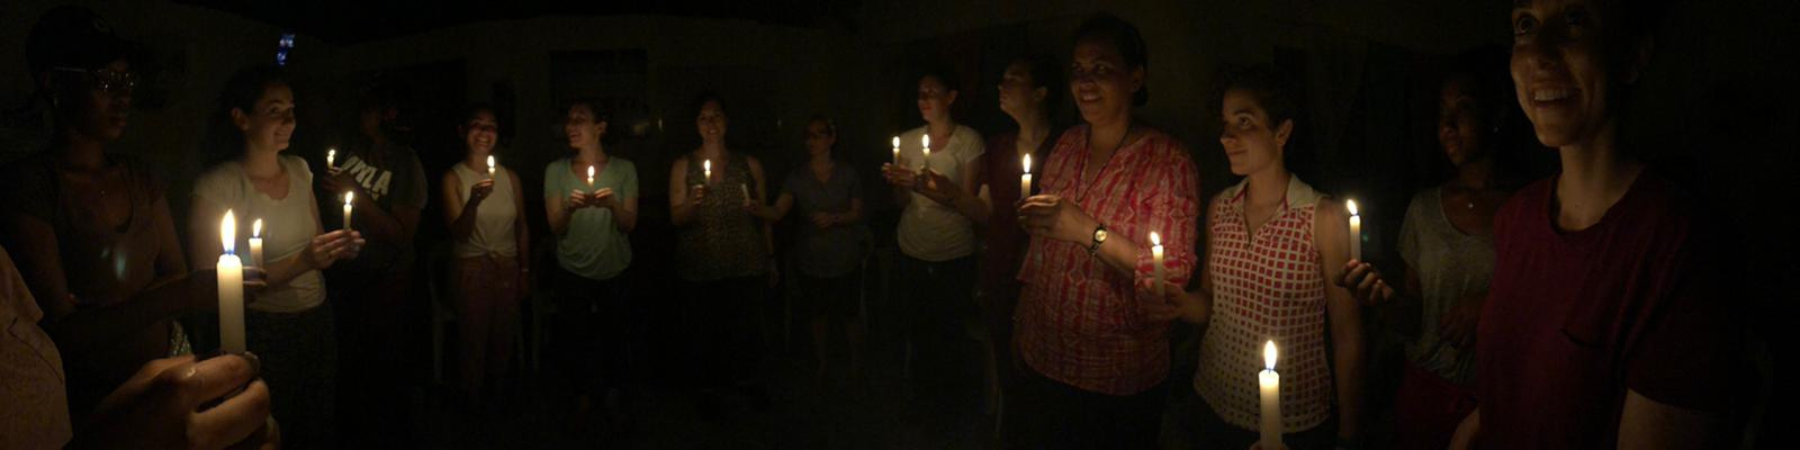 Students holding candles for group prayer